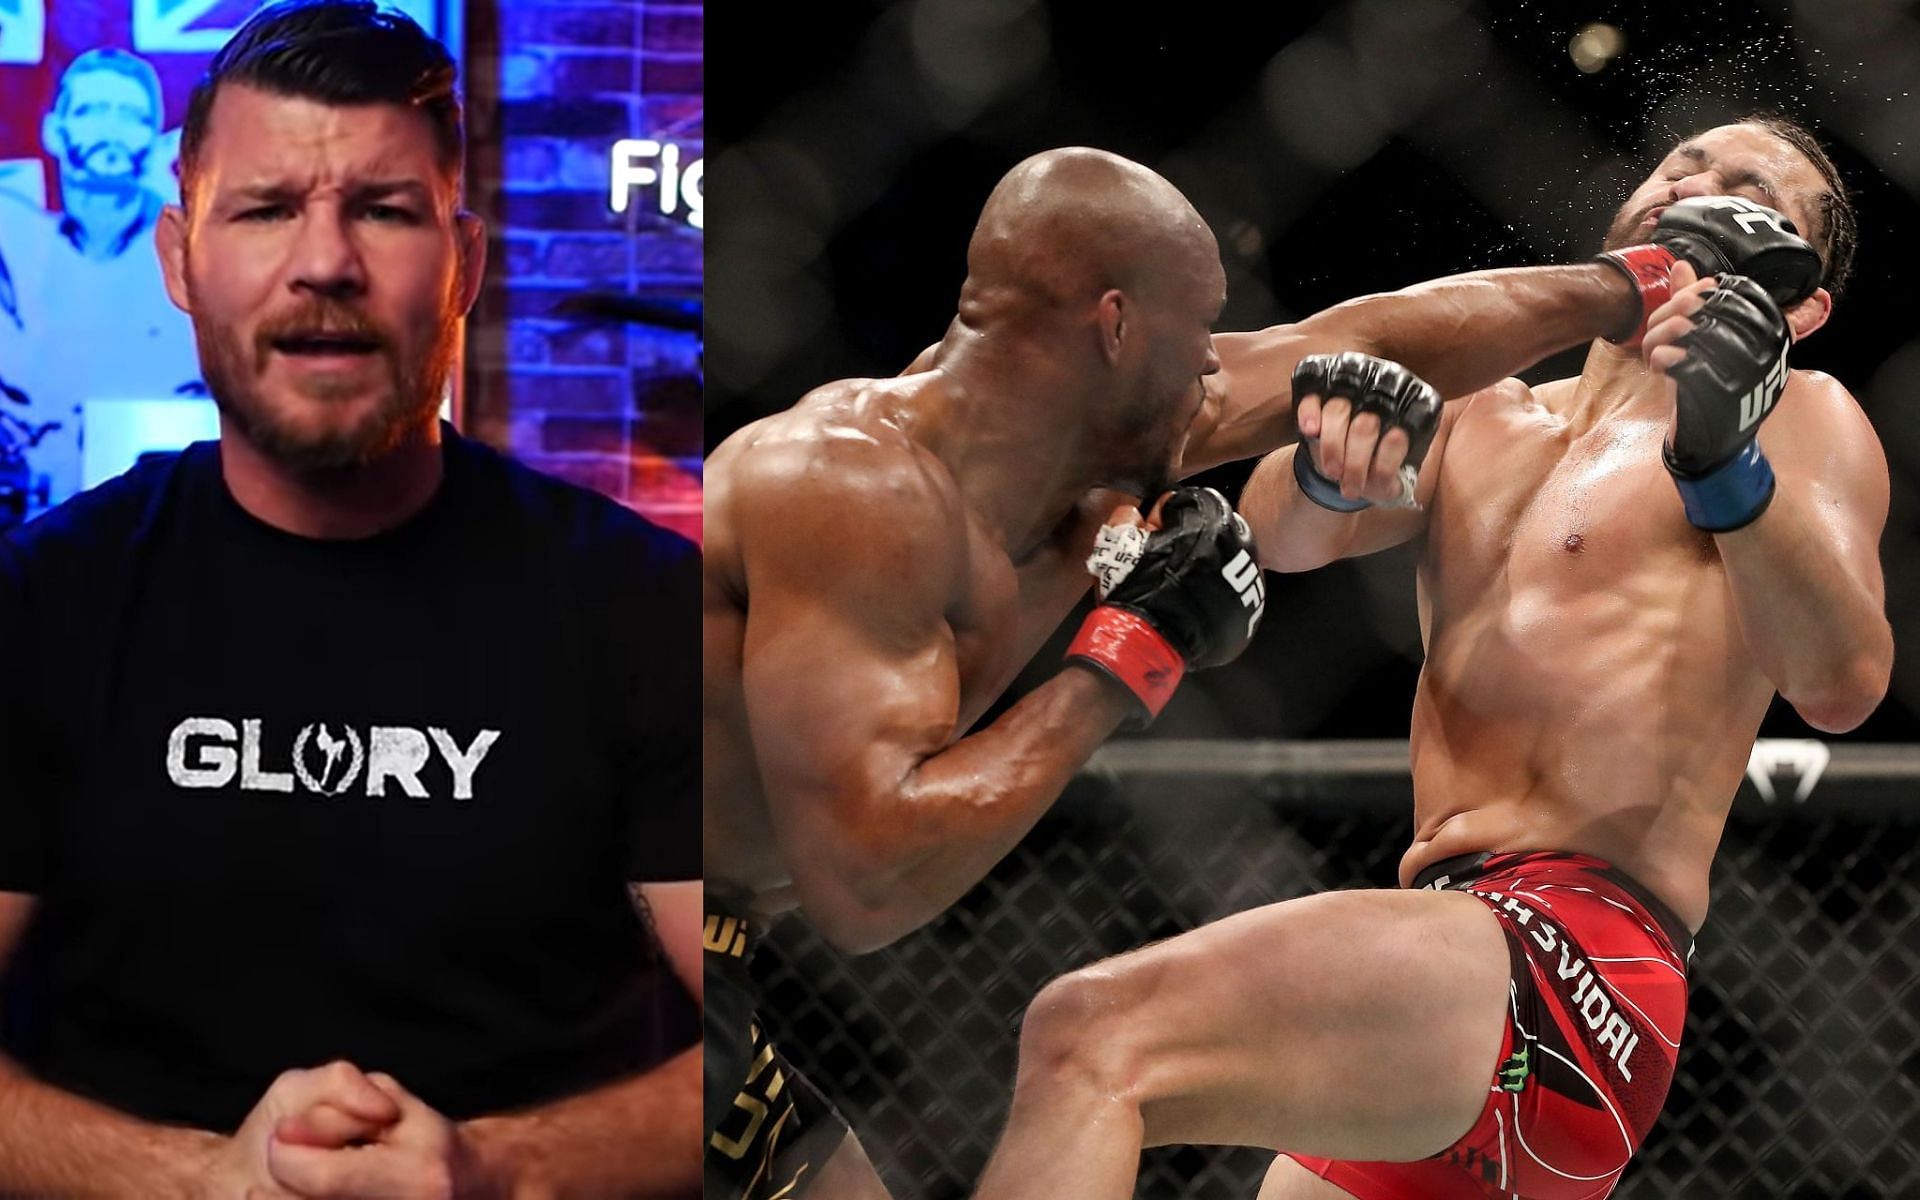 Michael Bisping (left) via. Youtube/MichaelBisping; Kamaru Usman (center) vs. Jorge Masvidal (right) in action at UFC 261